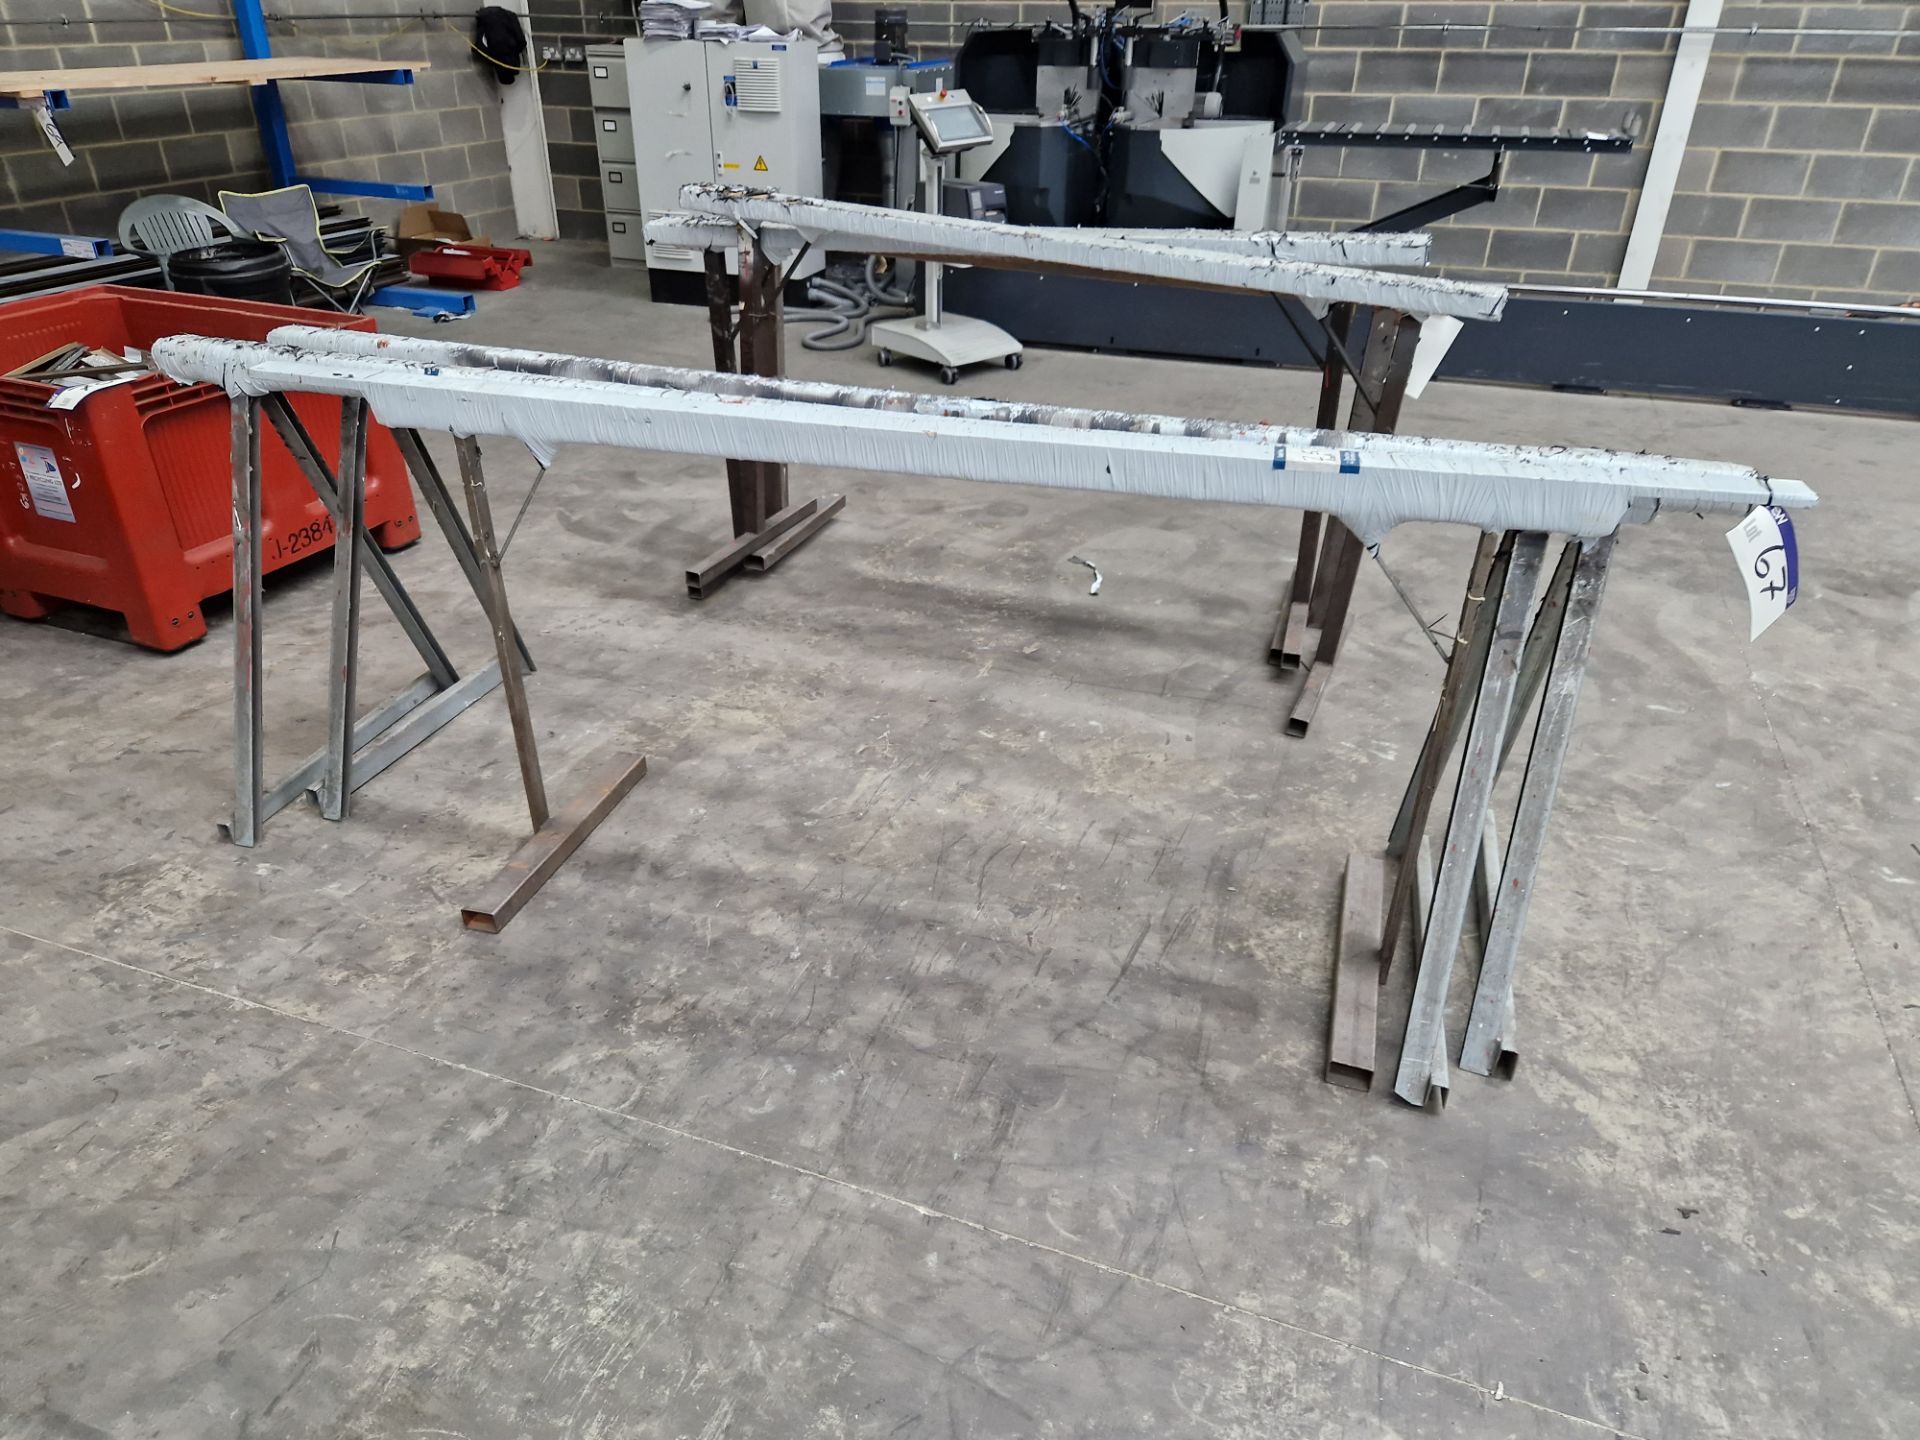 Three Steel Framed Trestles, Approx. 2.9m Long Please read the following important notes:- ***